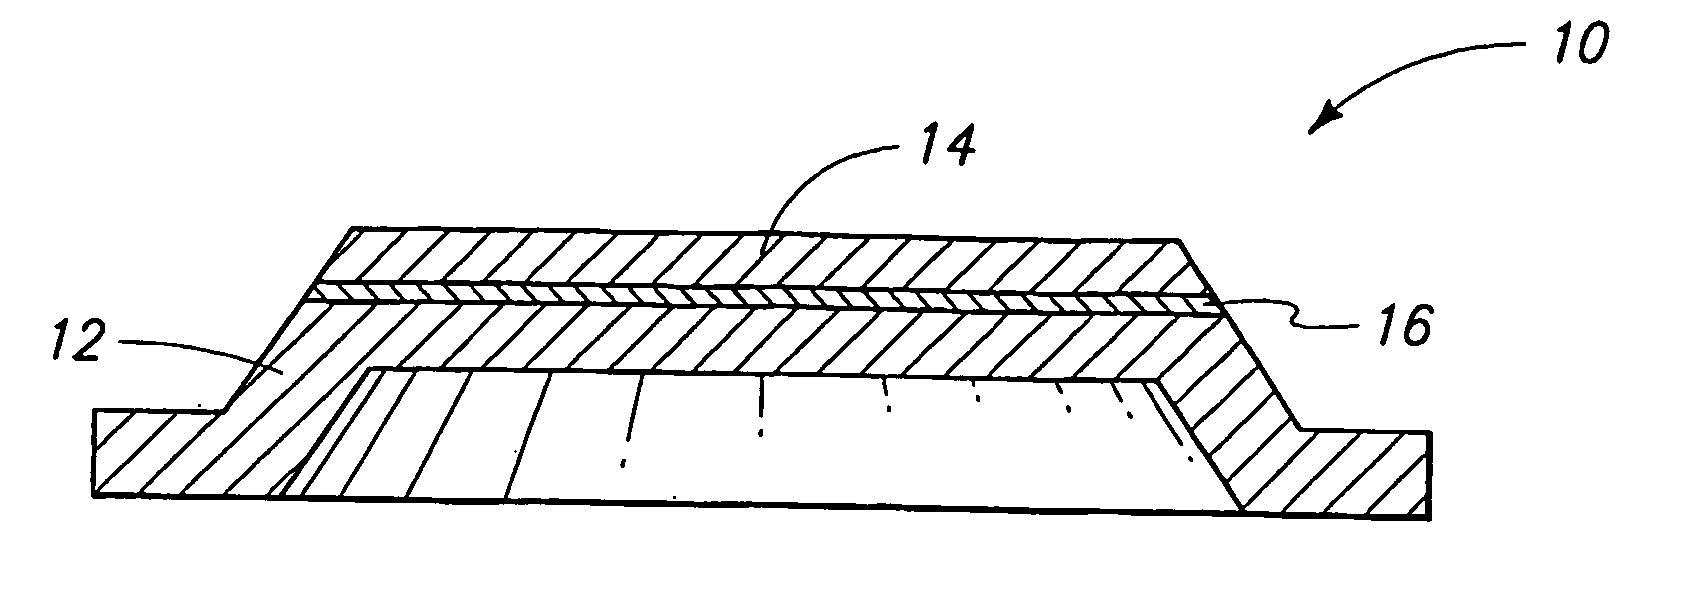 Copper-containing pvd targets and methods for their manufacture